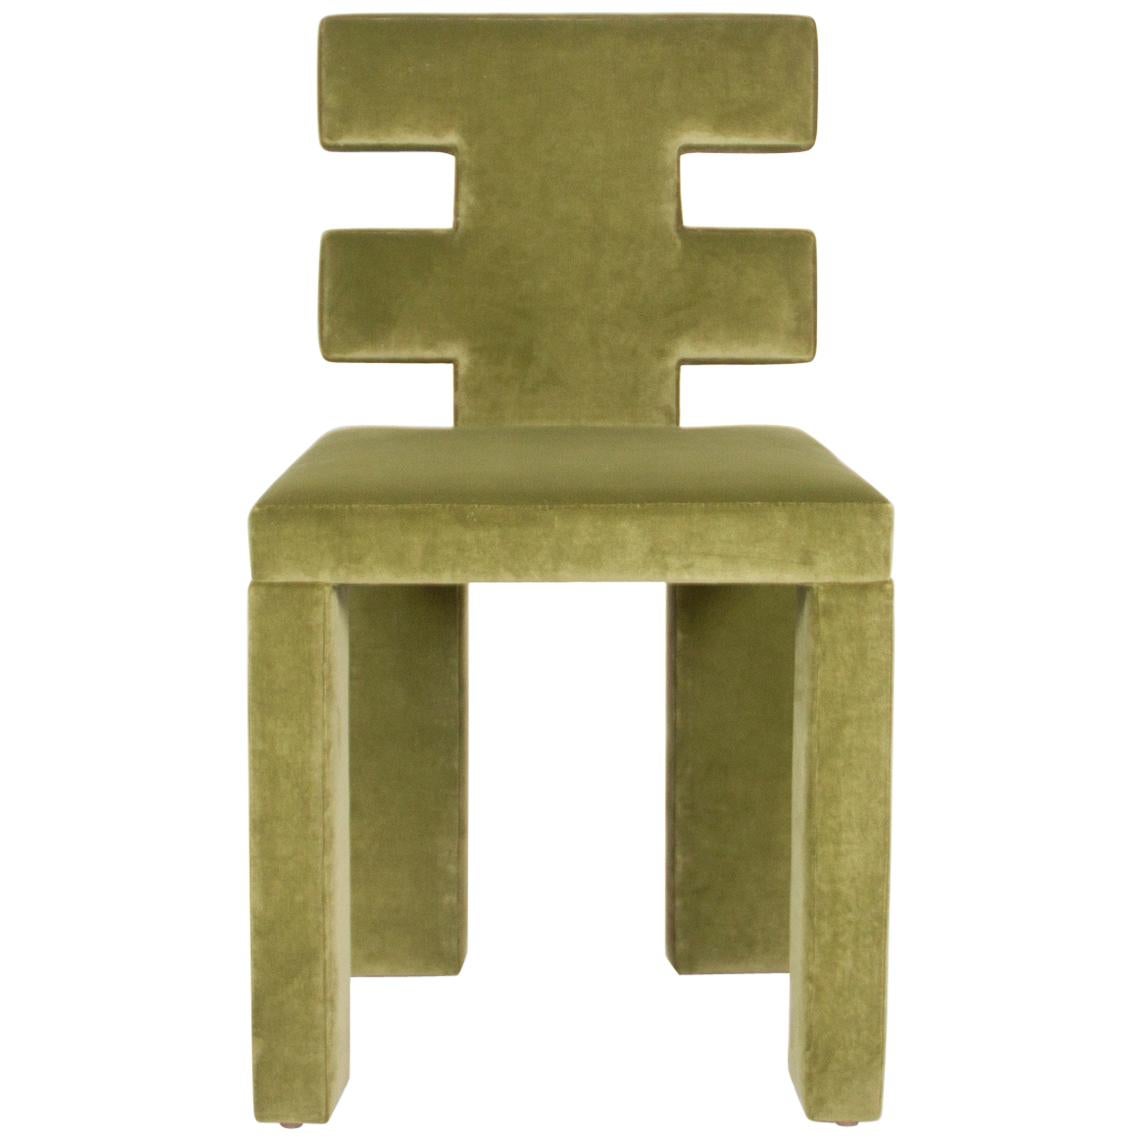 Green H-Chair by Estudio Persona